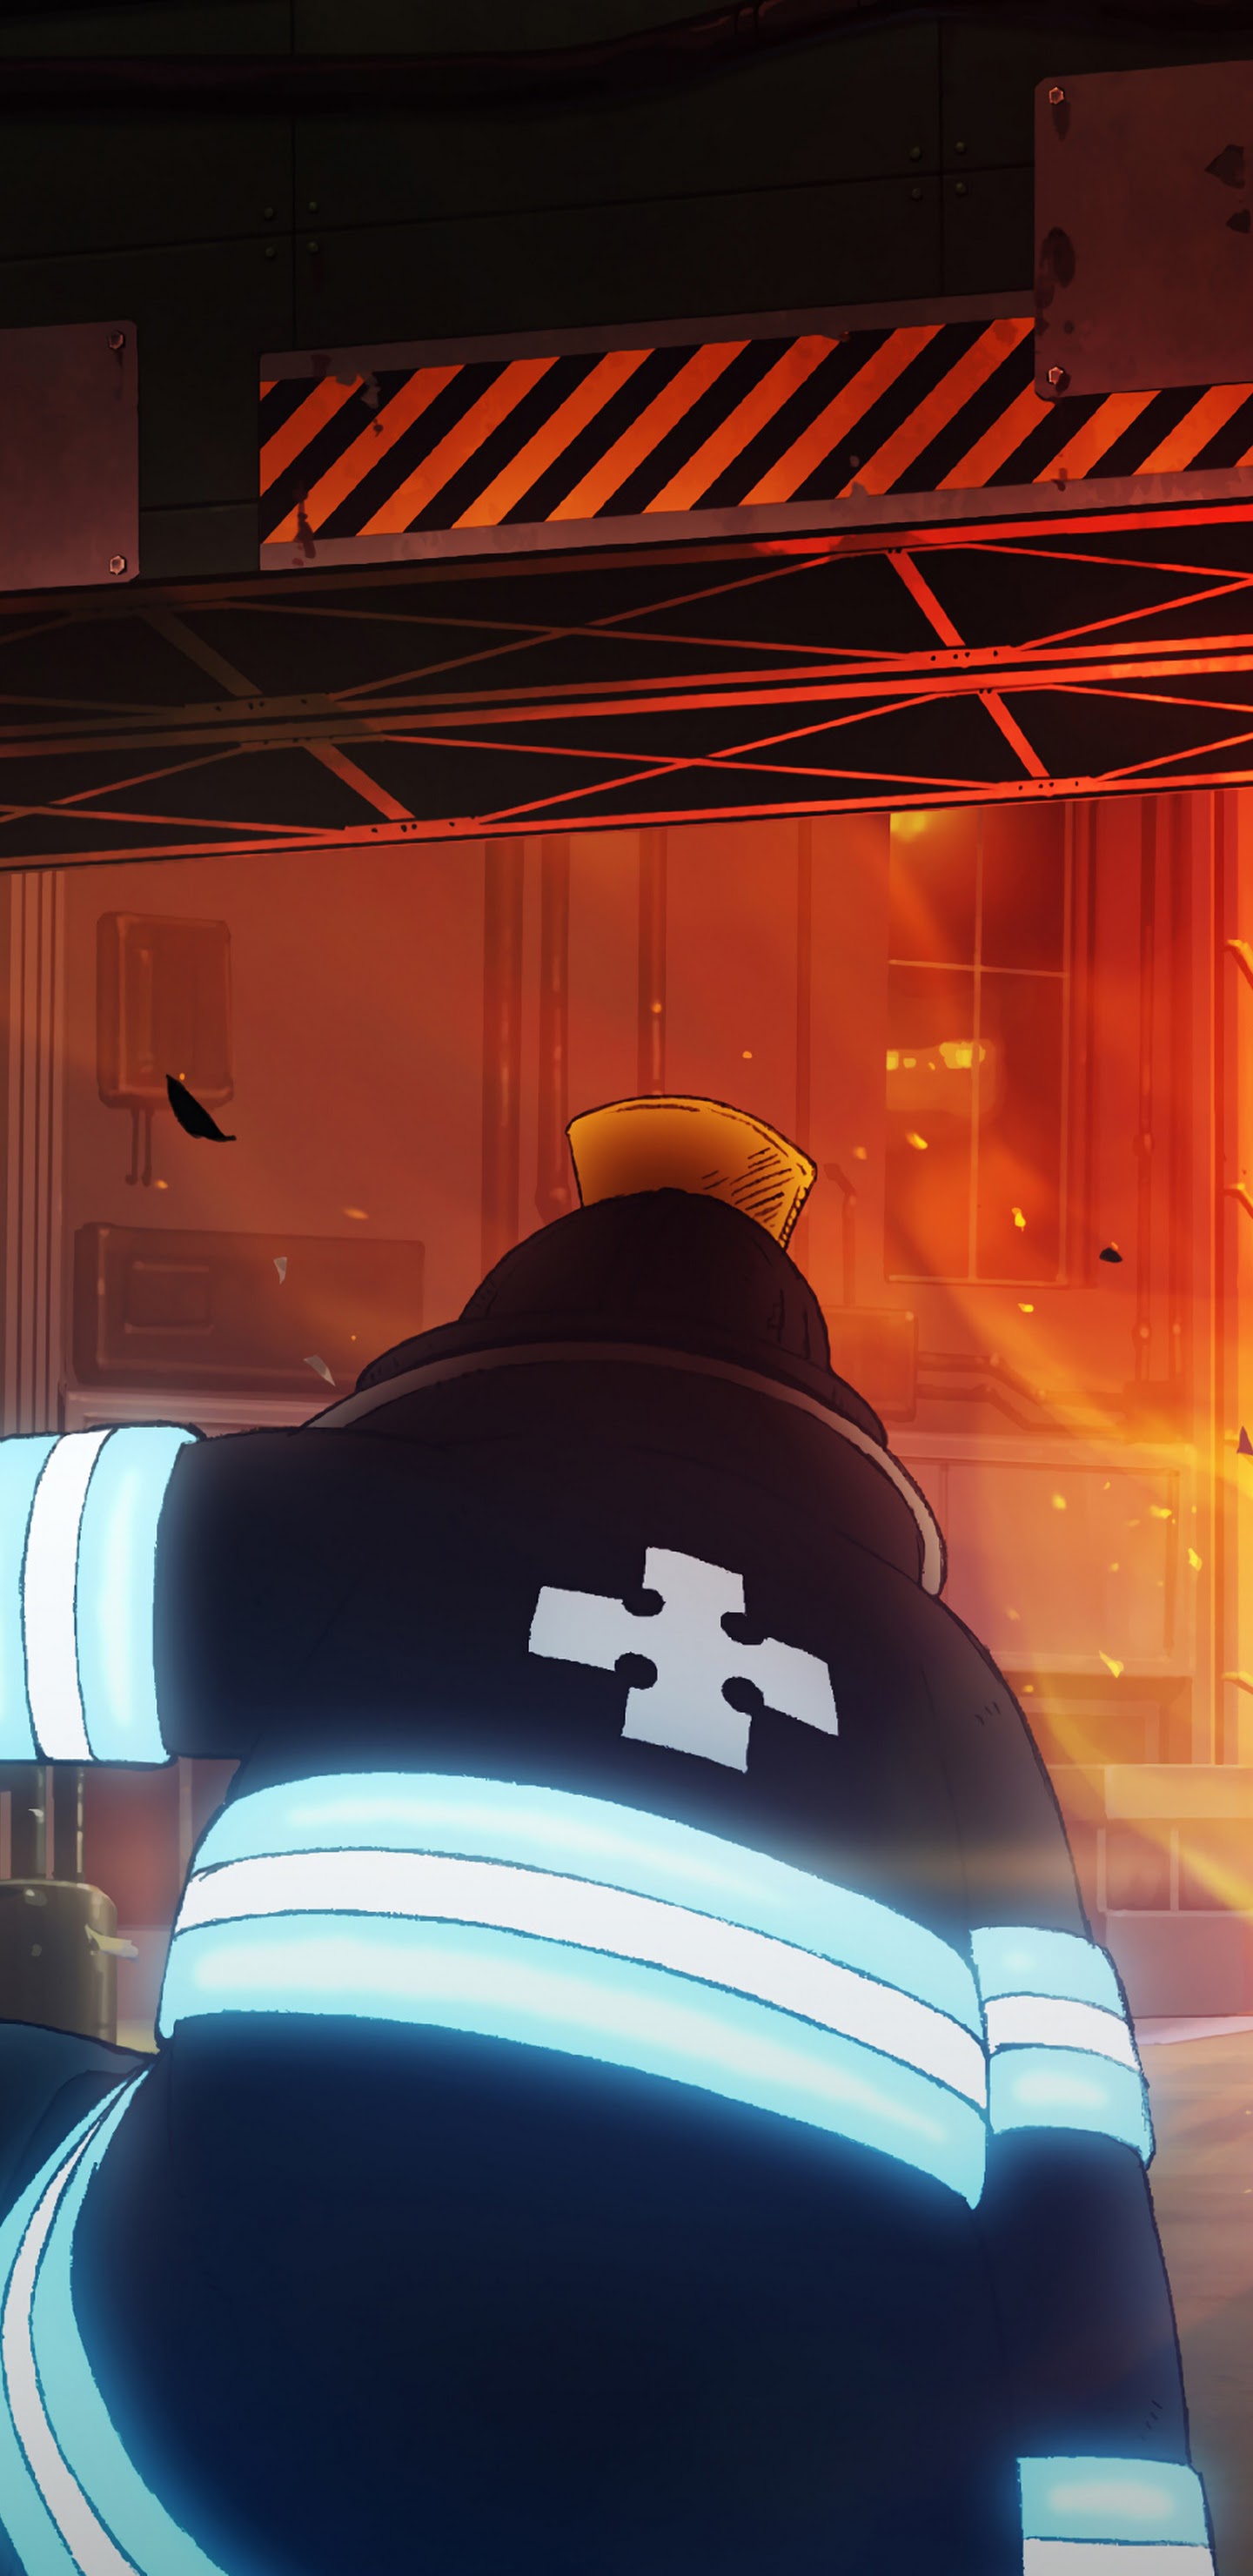 Fire Force manga wallpaper by 404A10 - Download on ZEDGE™